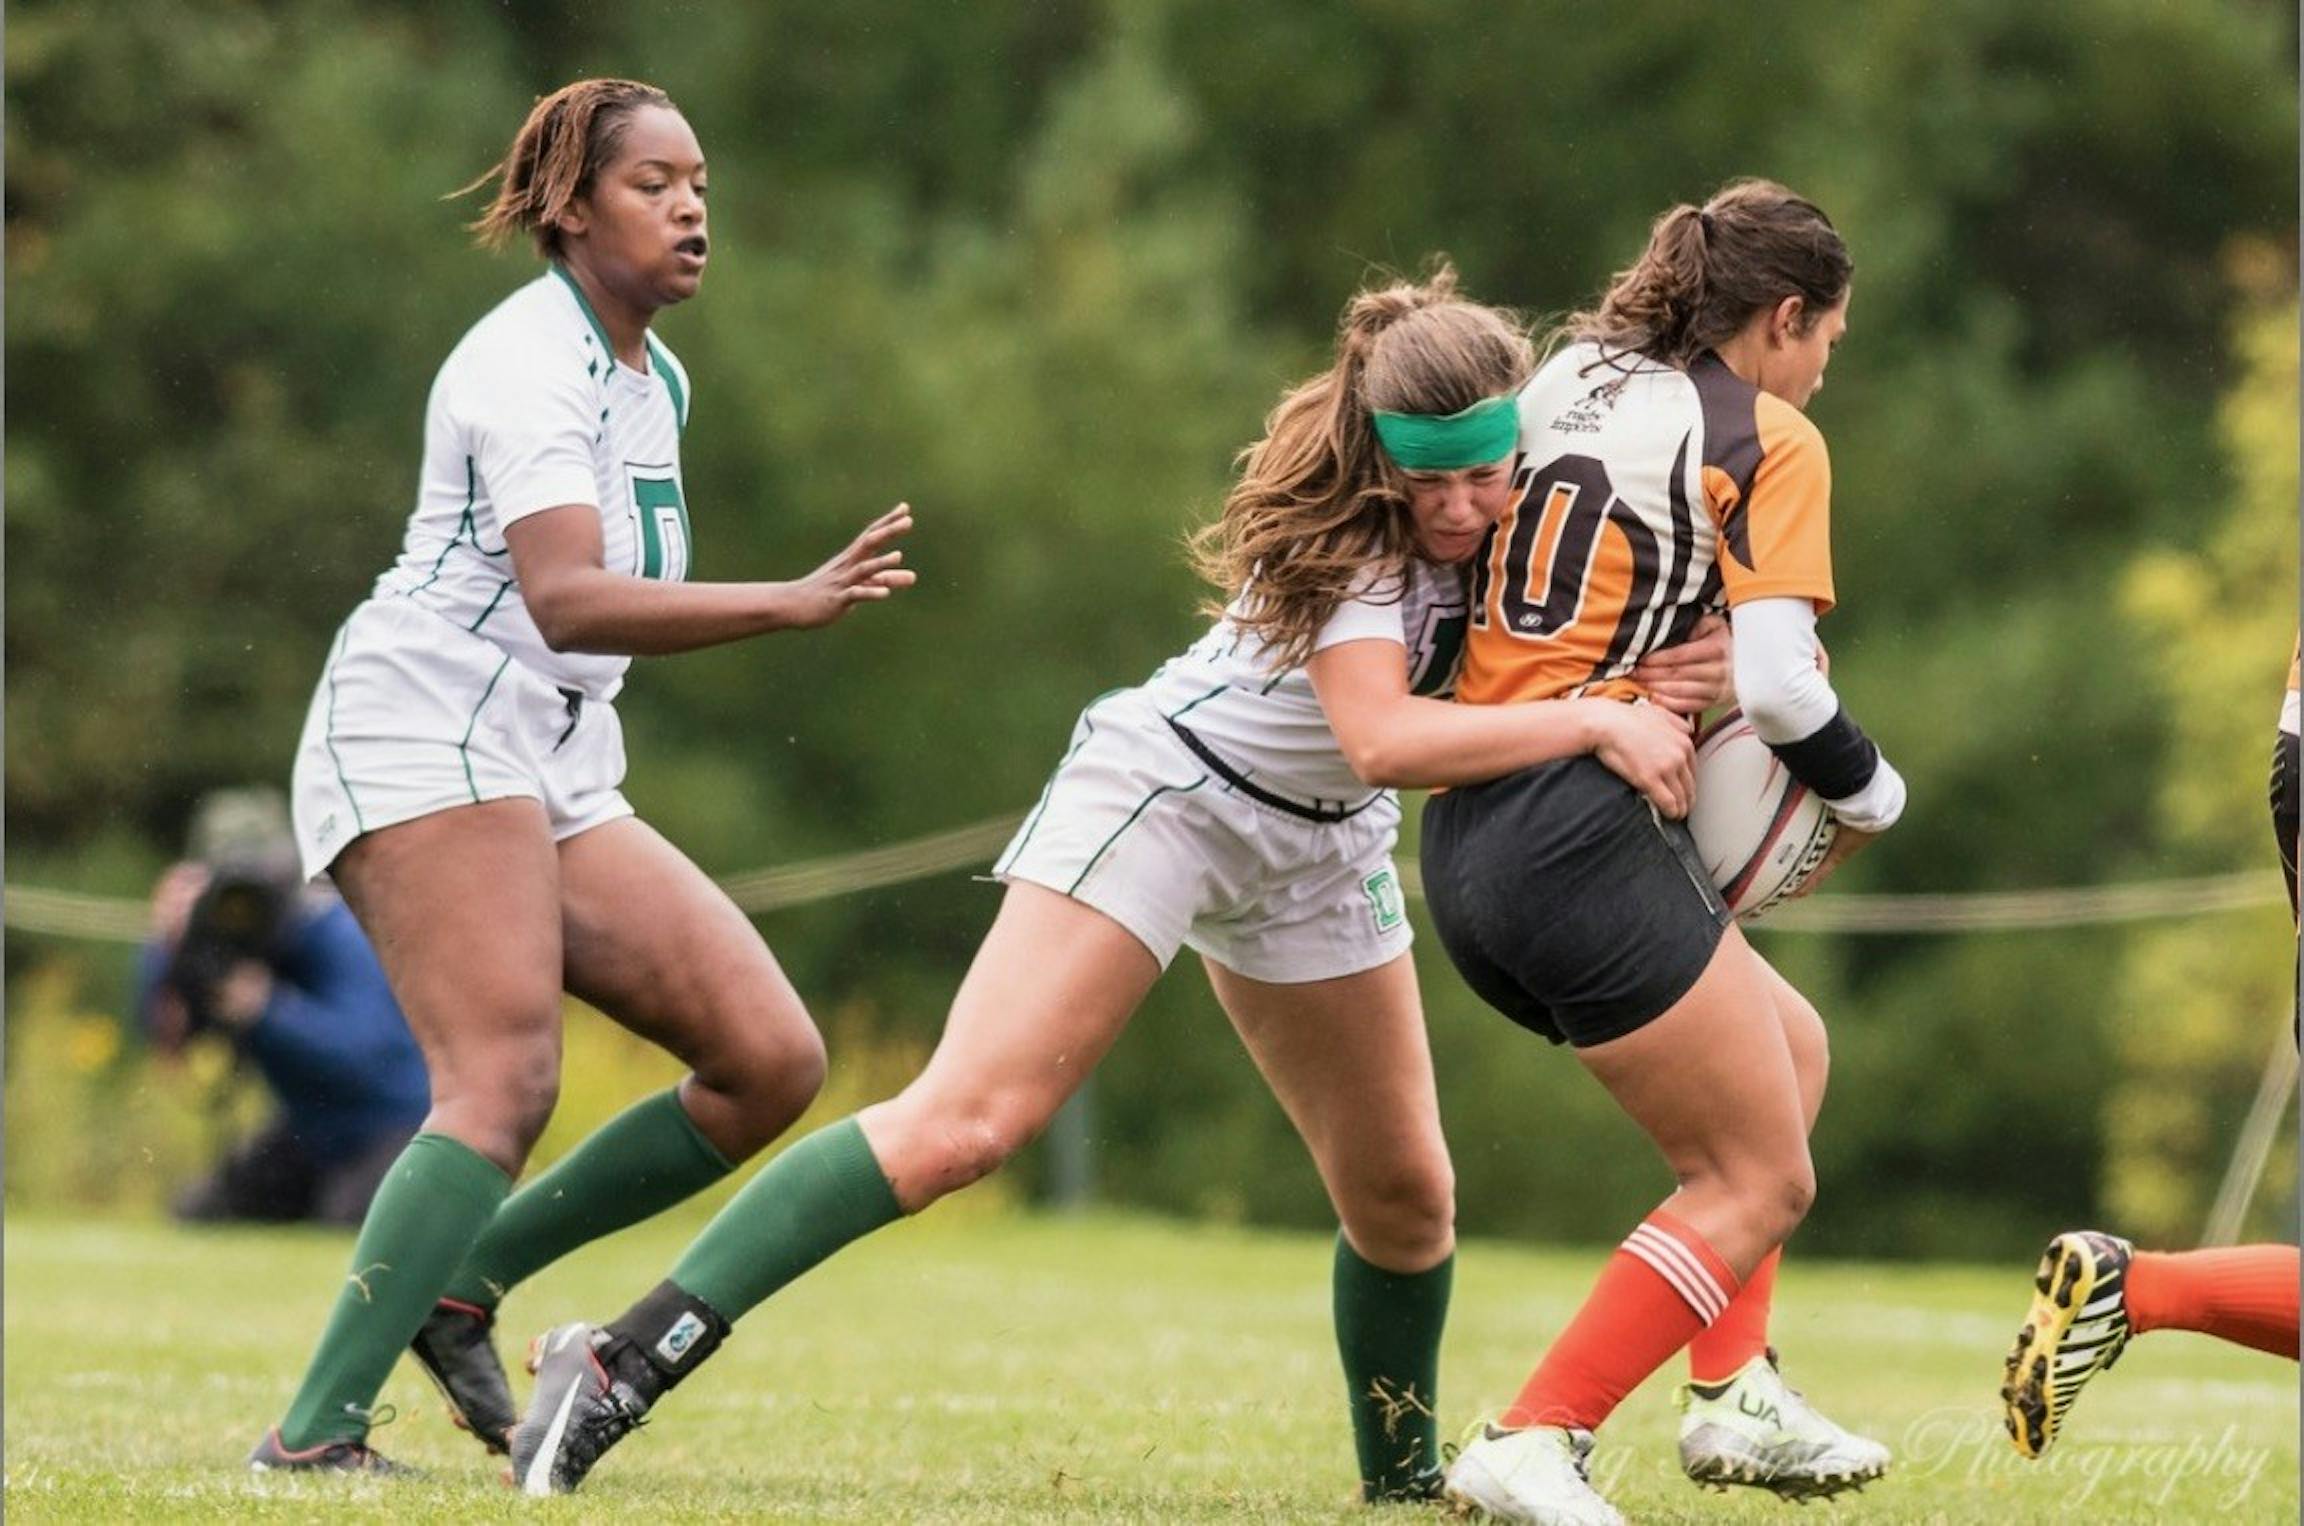 Five women’s rugby players earn all-NIRA postseason honors | The Dartmouth